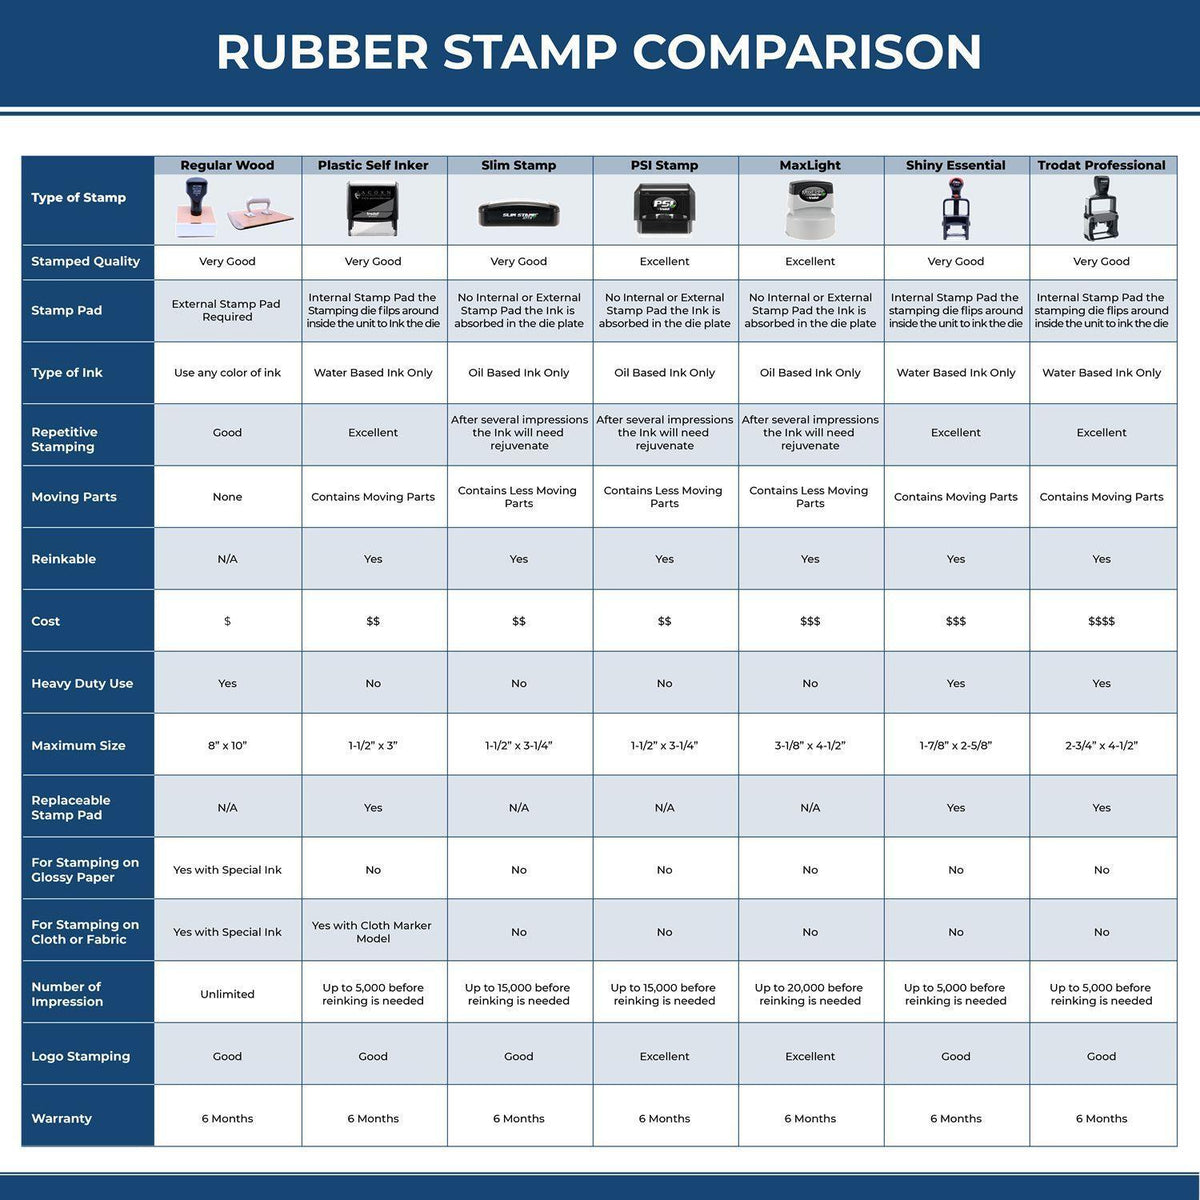 Large 100 Percent Rubber Stamp 4698R Rubber Stamp Comparison